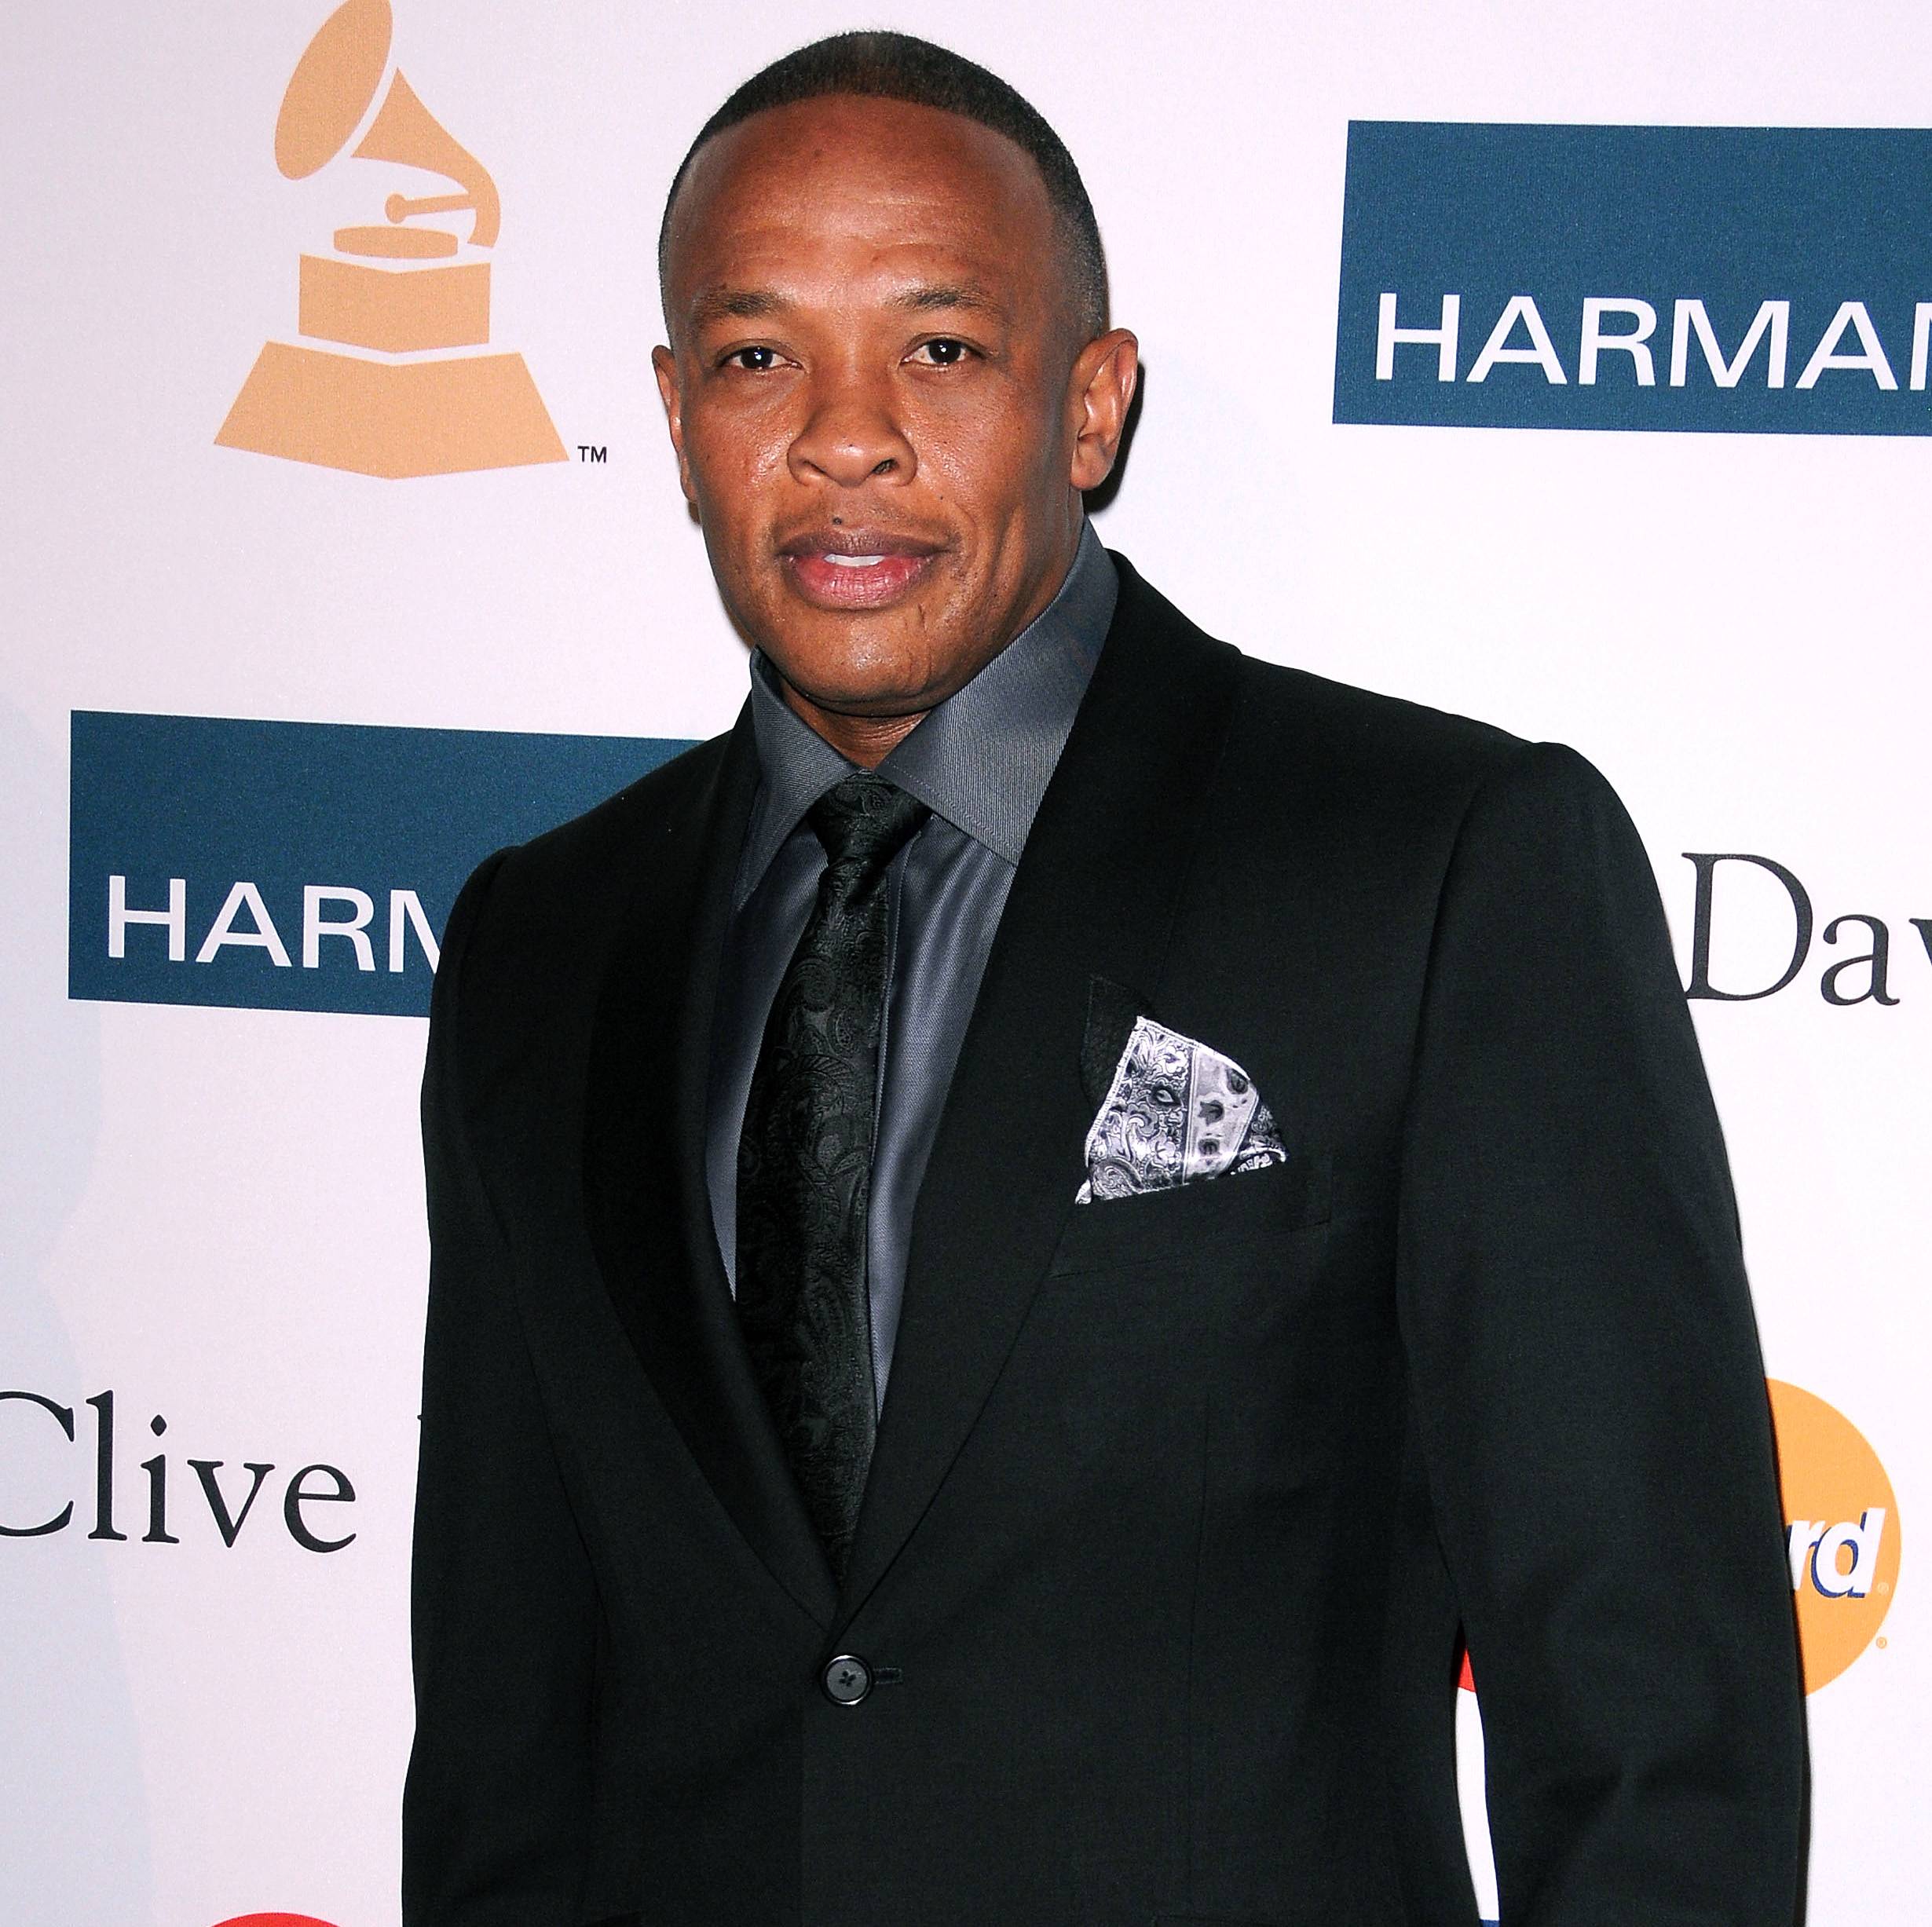 The Evolution of Dr. Dre - With Detox&nbsp;sorta-kinda-maybe confirmed for a 2012 release, and with Eminem, Snoop, Game and Kendrick Lamar all slated to be prominent collaborators, Dre is set to extend his legacy to an unprecedented fourth decade.&nbsp;The Doctor is most definitely&nbsp;in.(Photo: Scott Kirkland/PictureGroup)